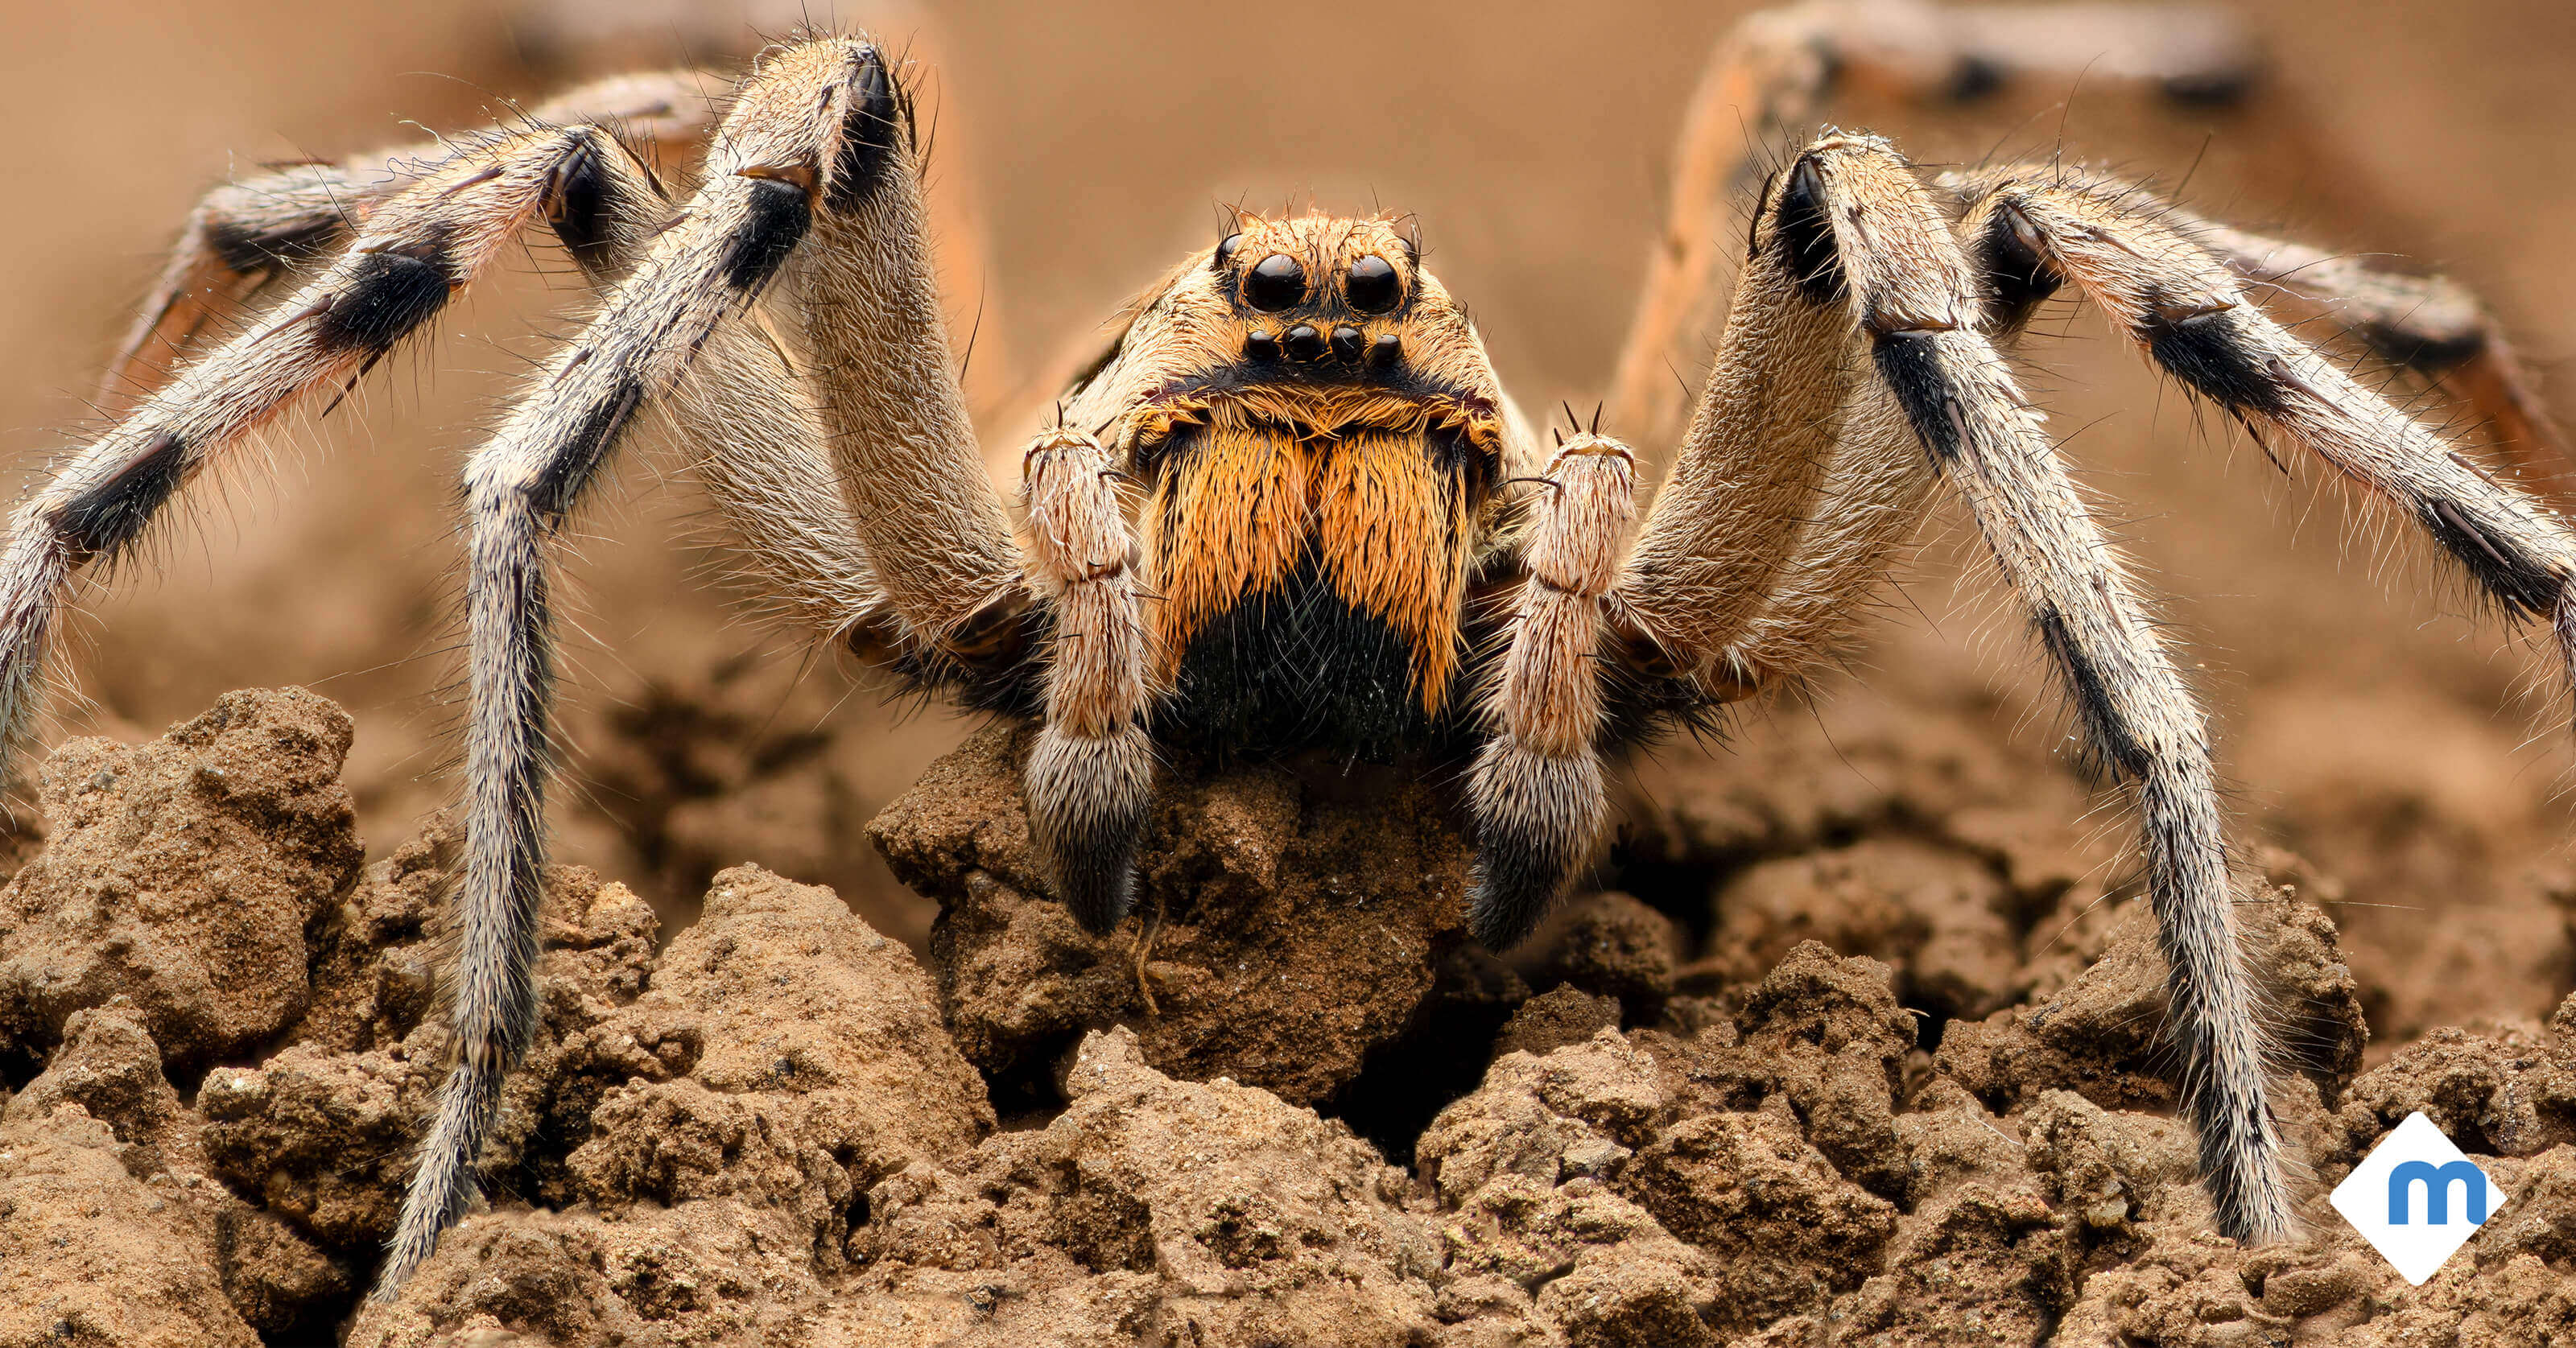 6 Common Spiders That Make Your Skin Crawl